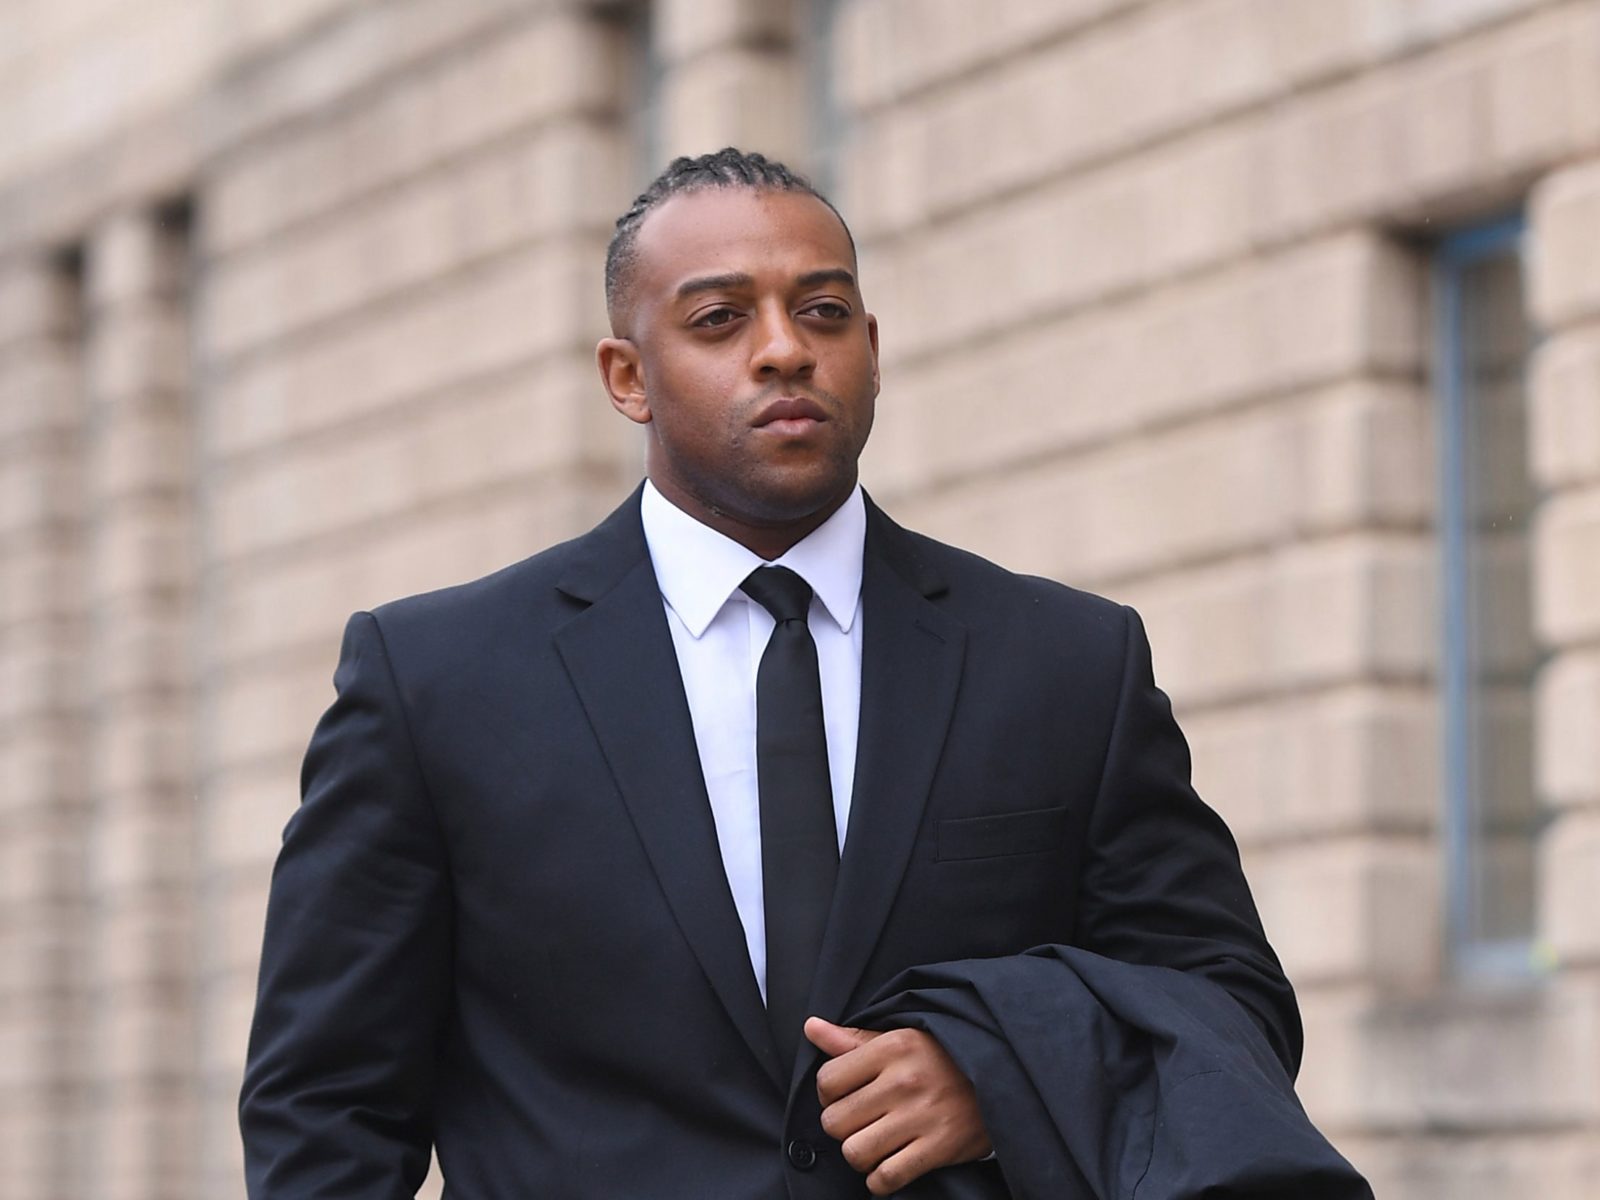 JLS founder Oritsé Williams says he hasn't worked for three years due to the rape allegations levied against him